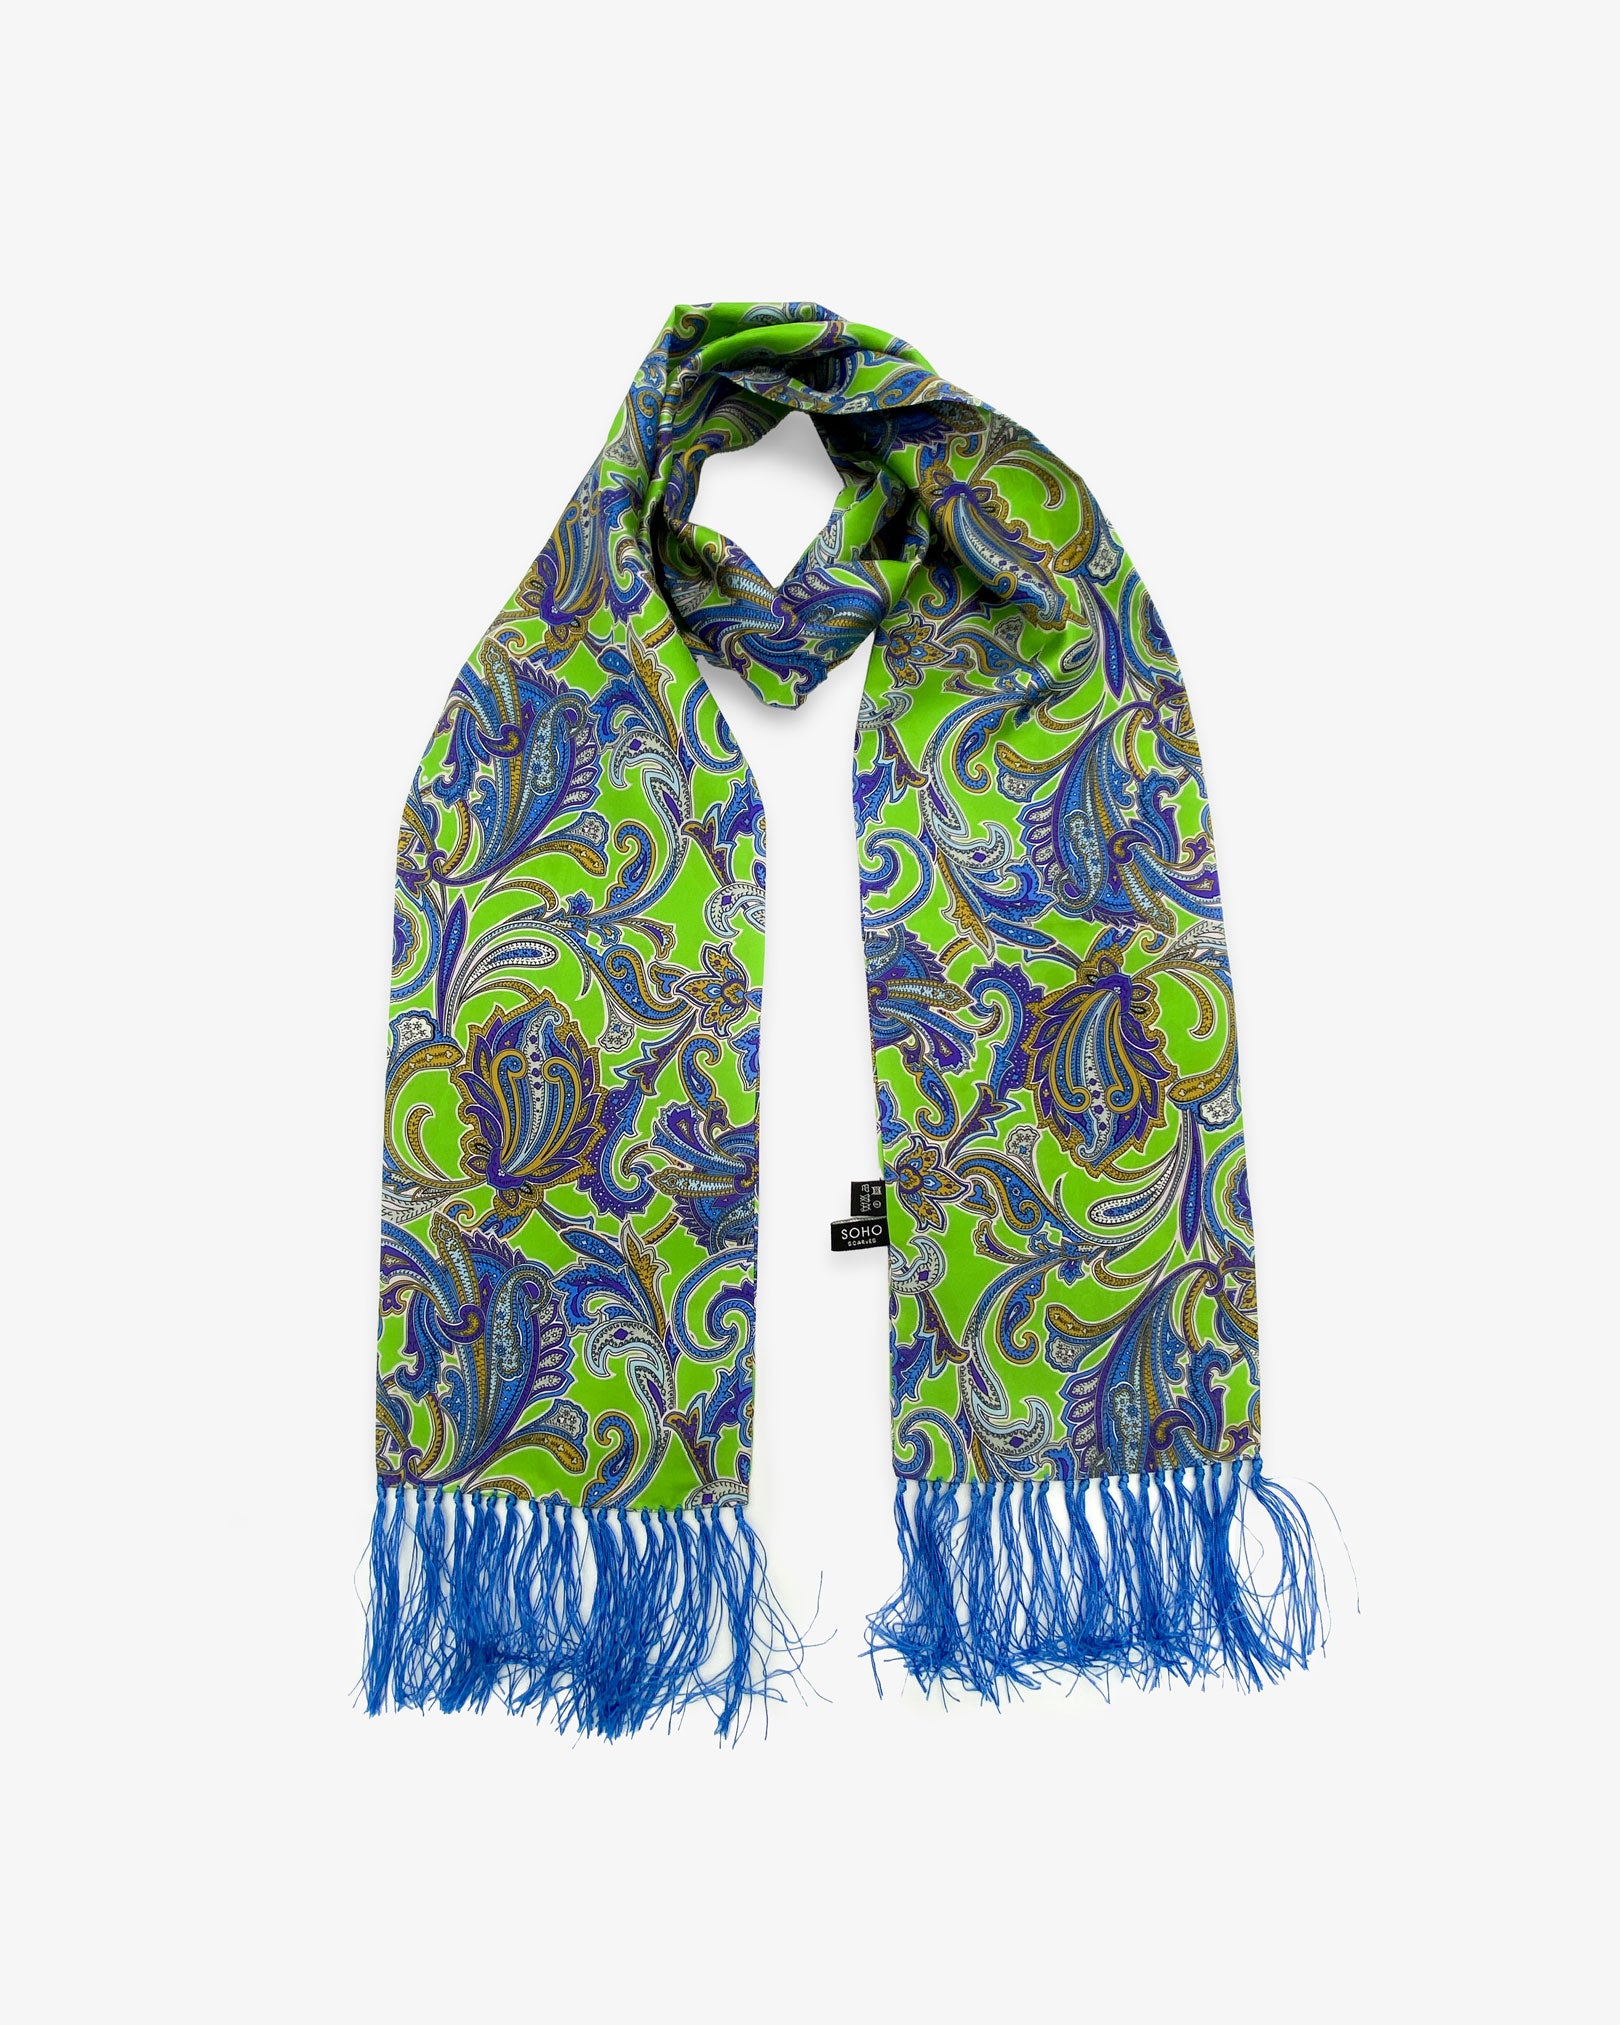 Looped 'Daytona' silk aviator scarf, clearly showing blue paisley swirls and floral symbols on a bright green ground. Framed neatly with a bright blue 3 inch fringe.